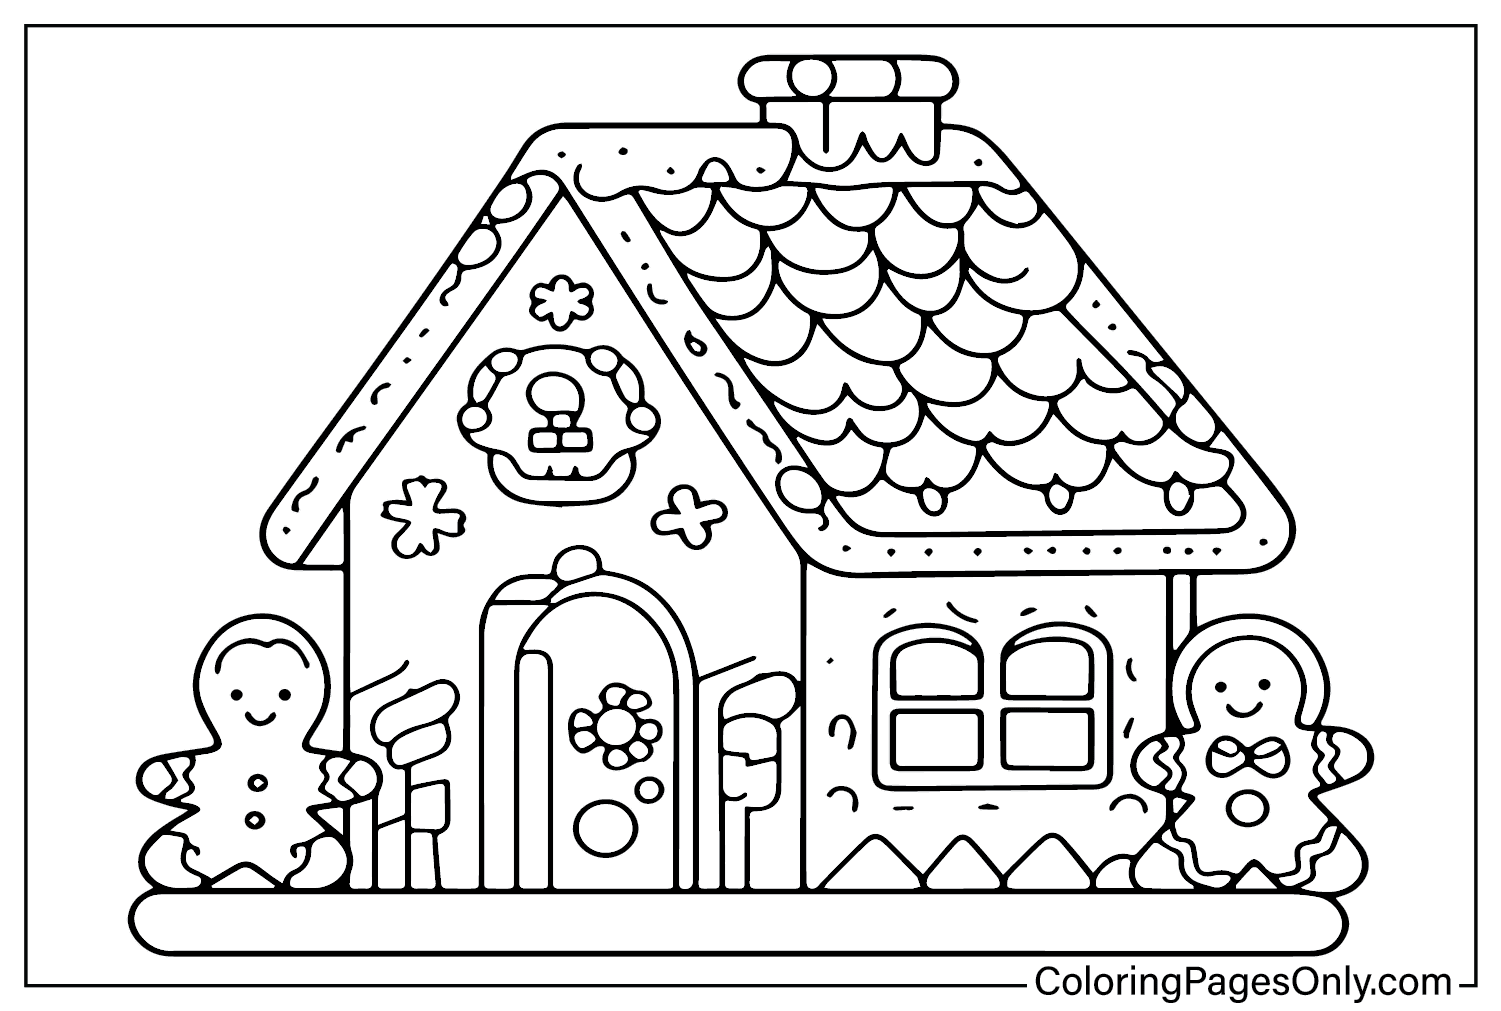 Gingerbread House Coloring Page for Adults from Gingerbread House